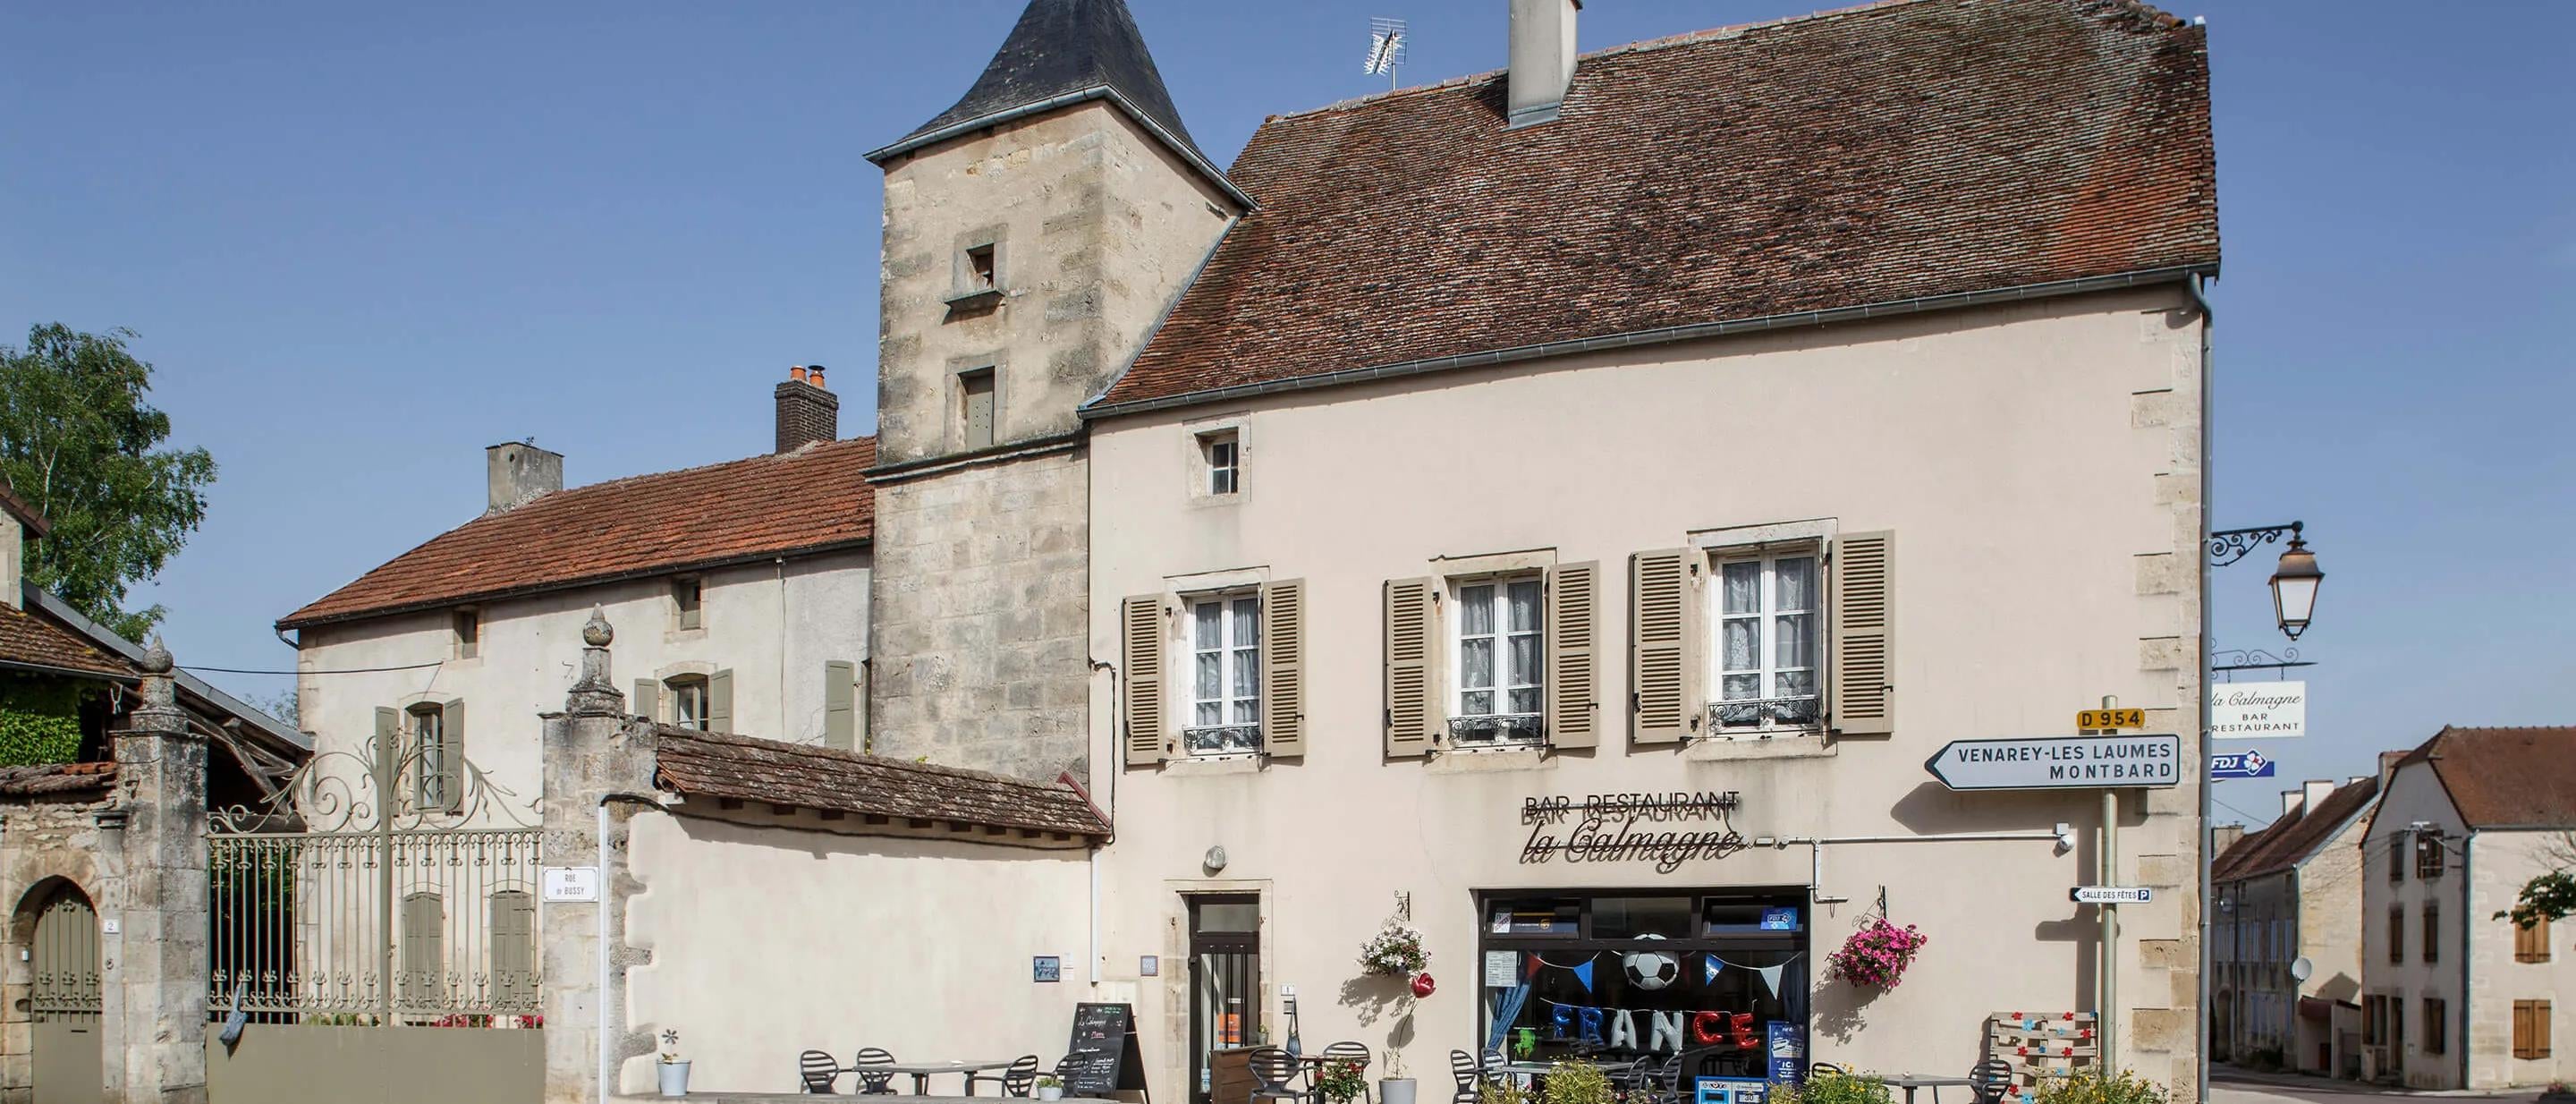 Large stone building on quiet street corner in a French village 